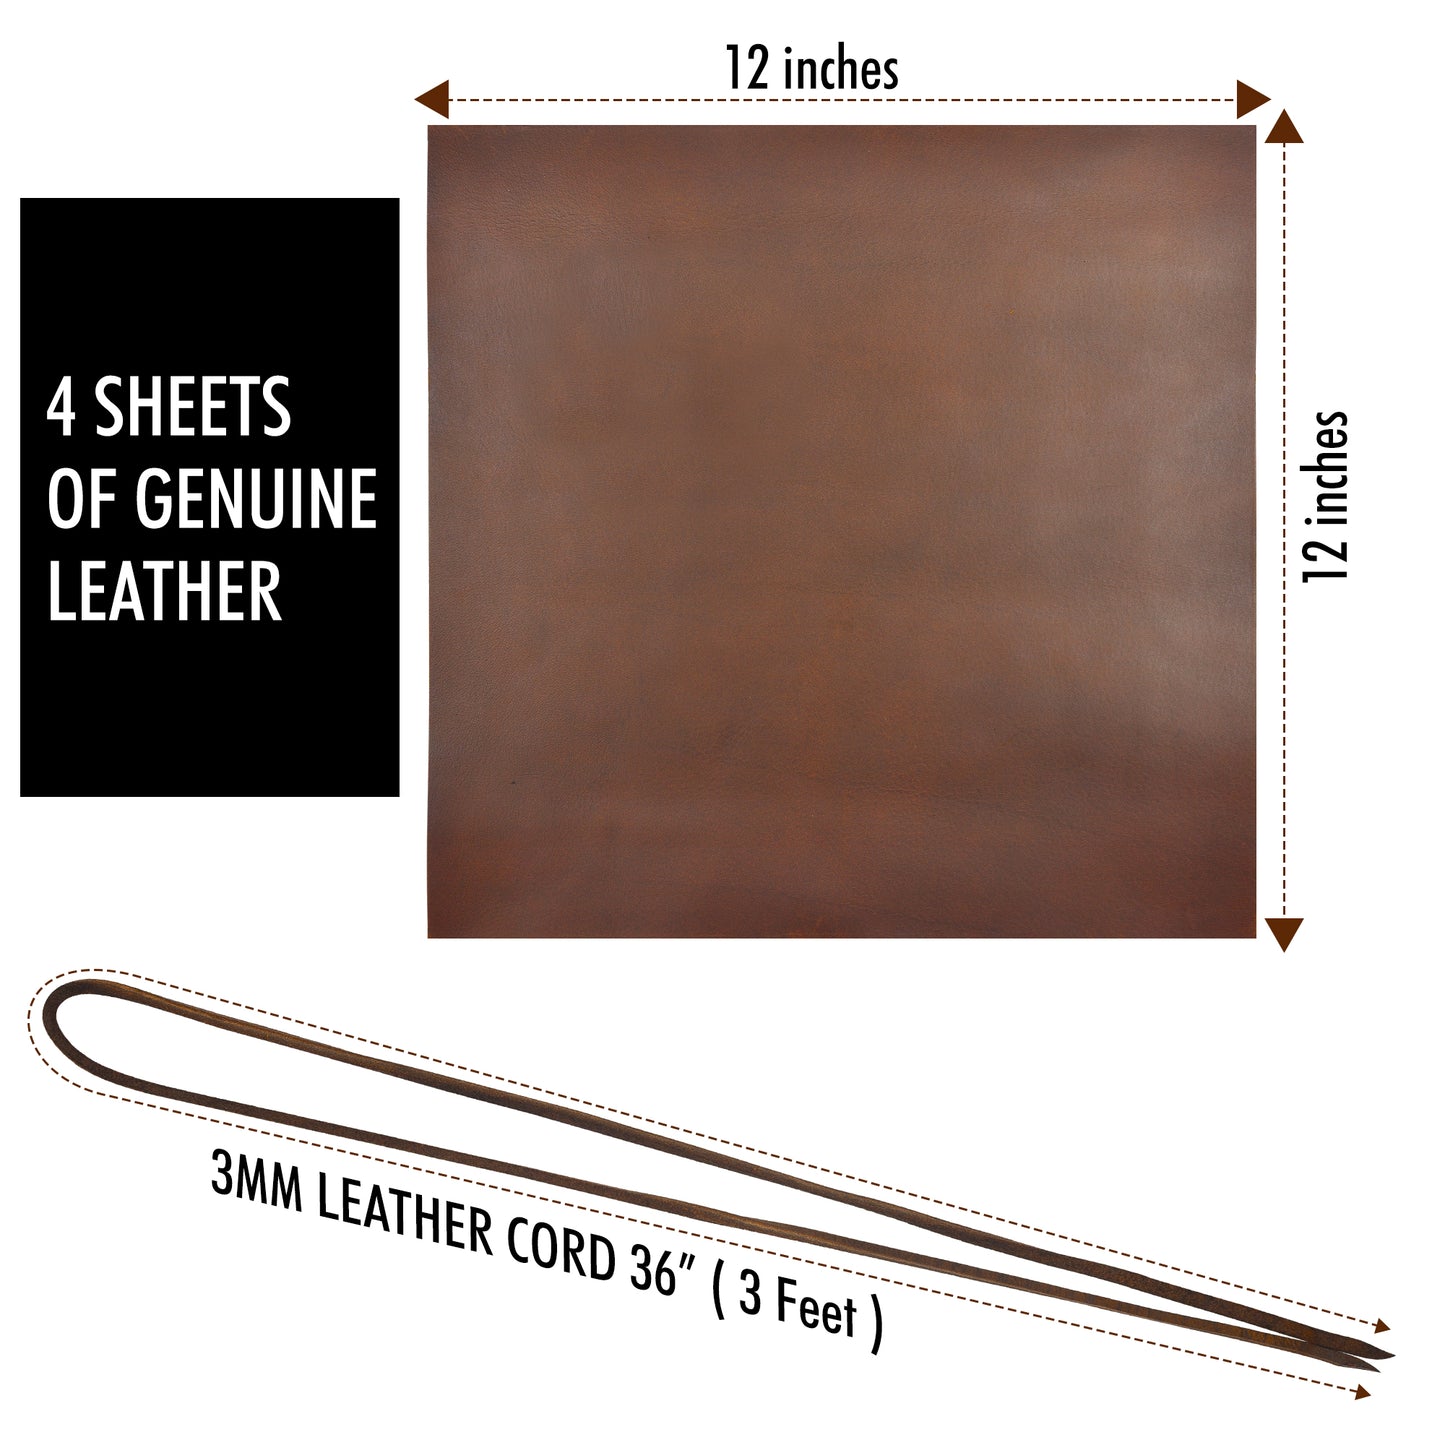 NUTUCH Genuine Leather Sheets for Crafts | 4 Sheets | Leather Crafting Sheet Leatherworking Arts | 12" x 12" inches + 36" Leather Cord | NT-500-B-LS-12